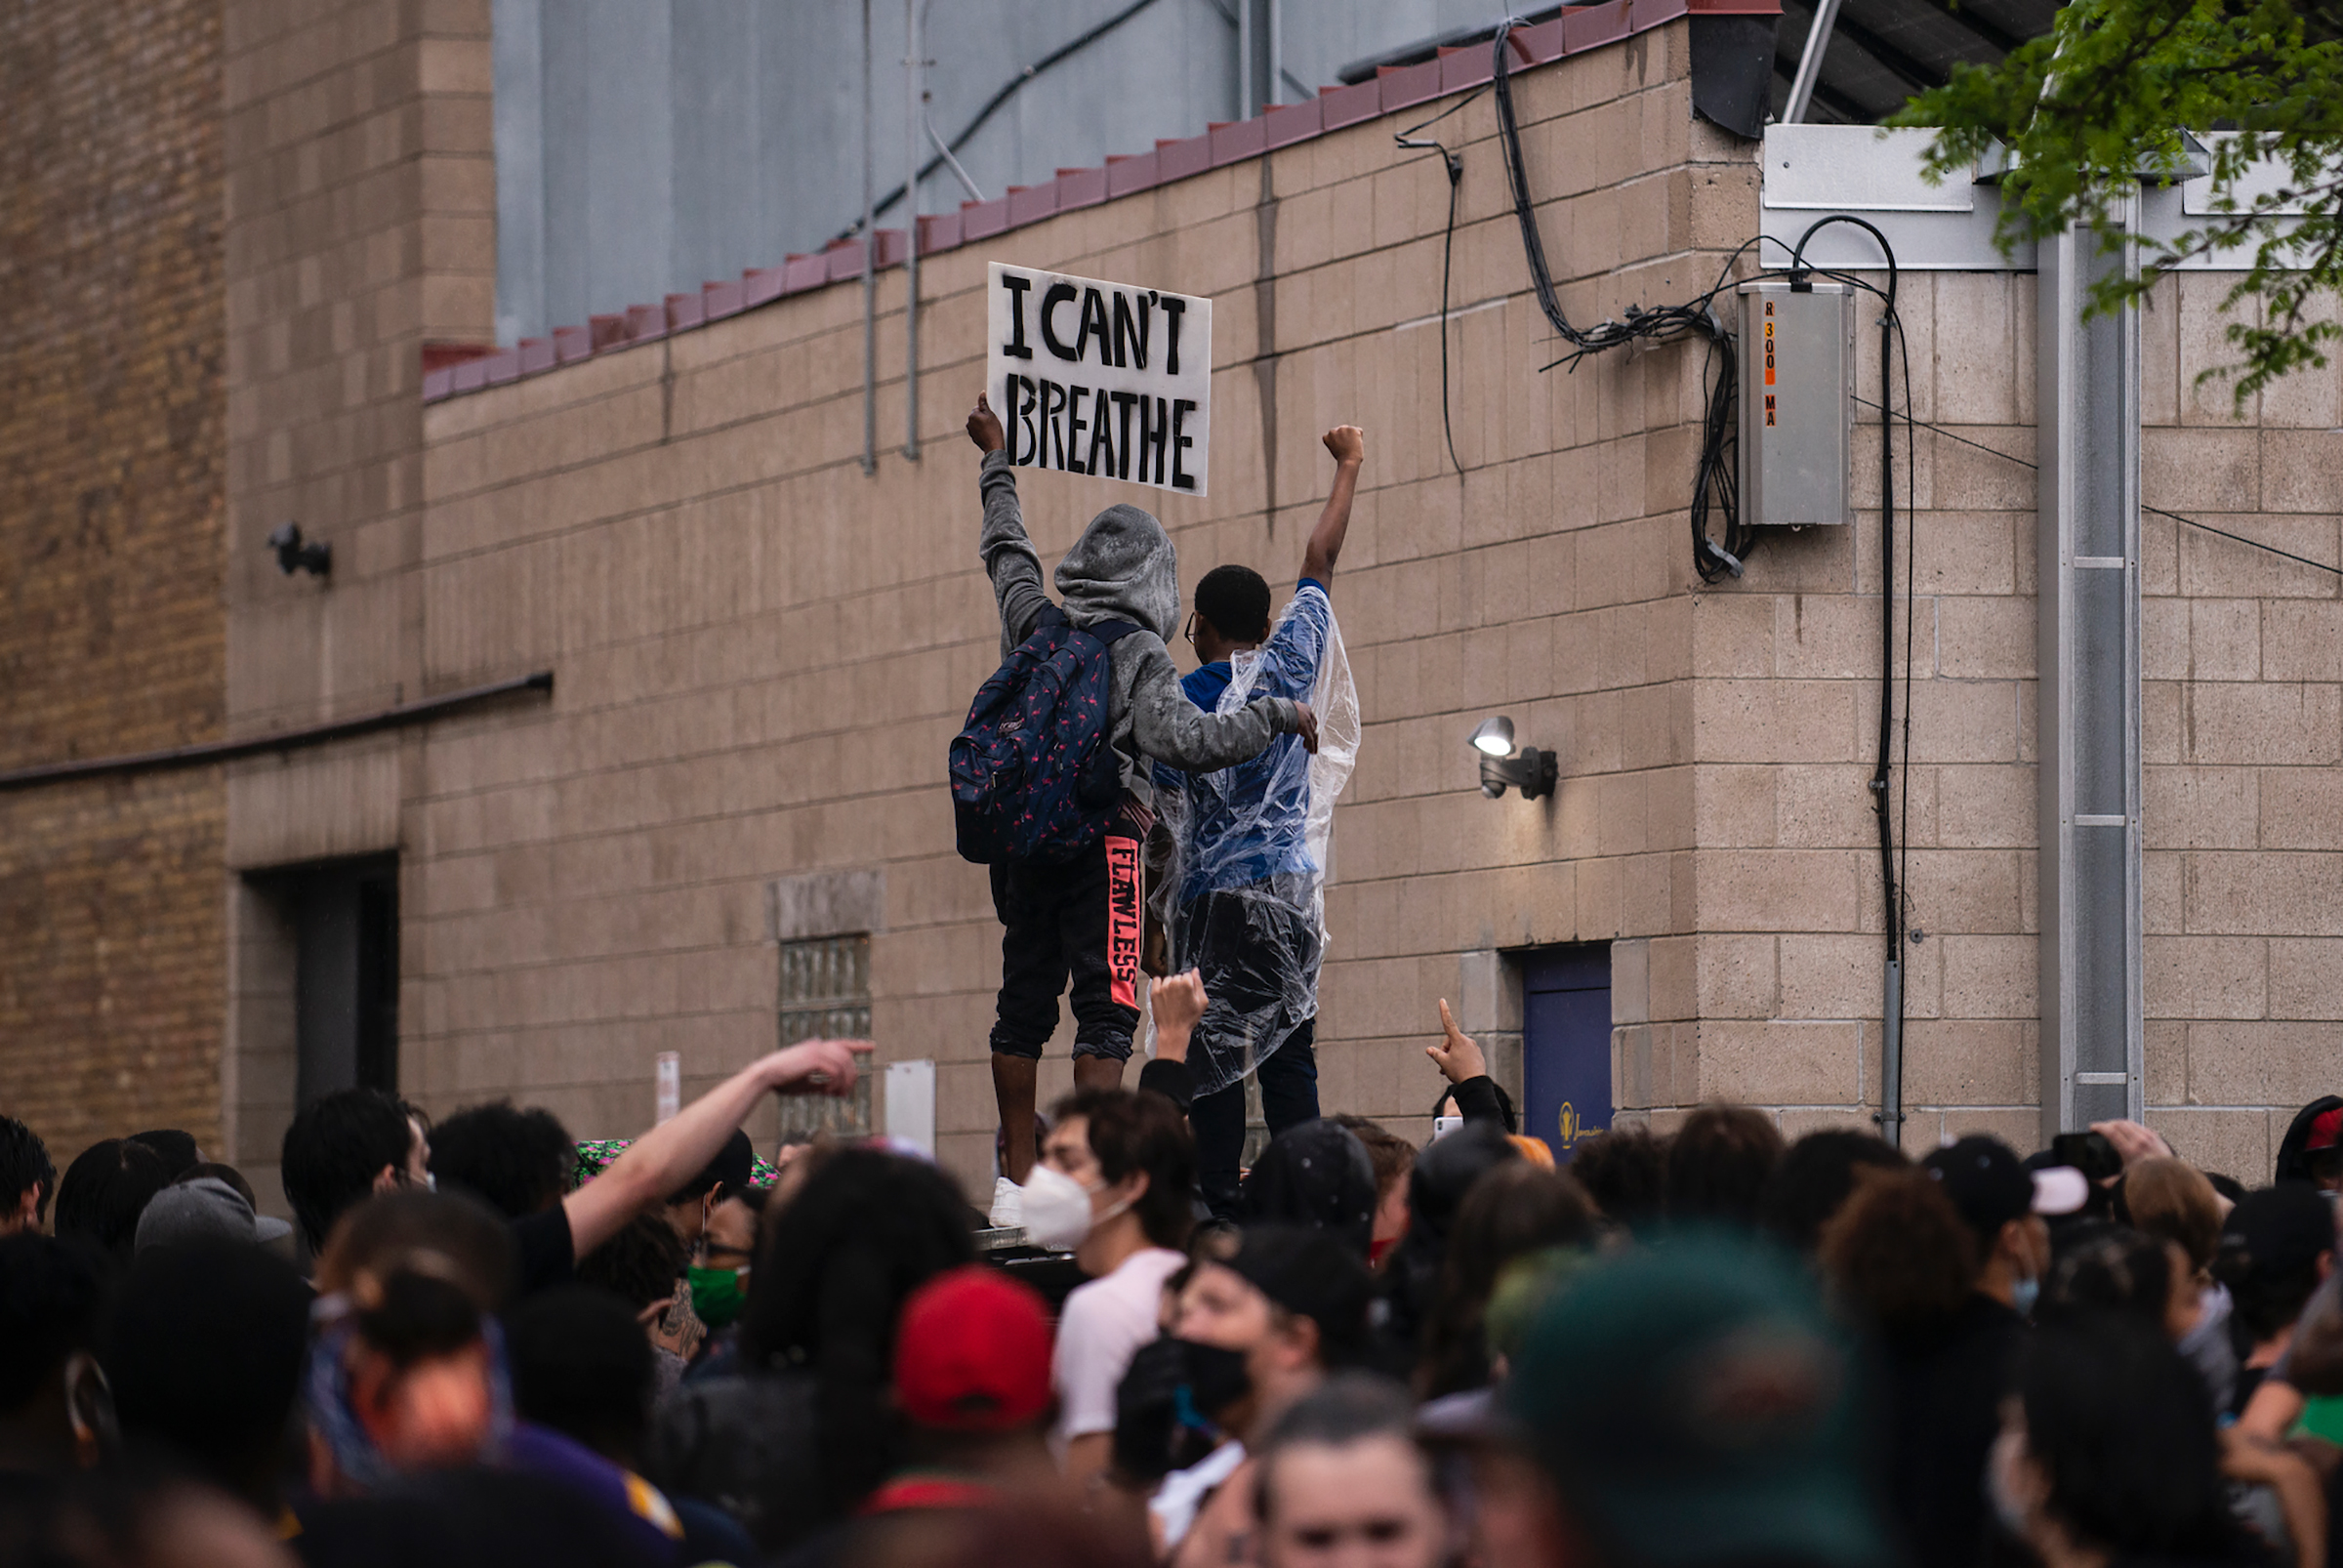 Protesters demonstrate against the death of George Floyd outside the 3rd Police Precinct station in Minneapolis on May 26, 2020.